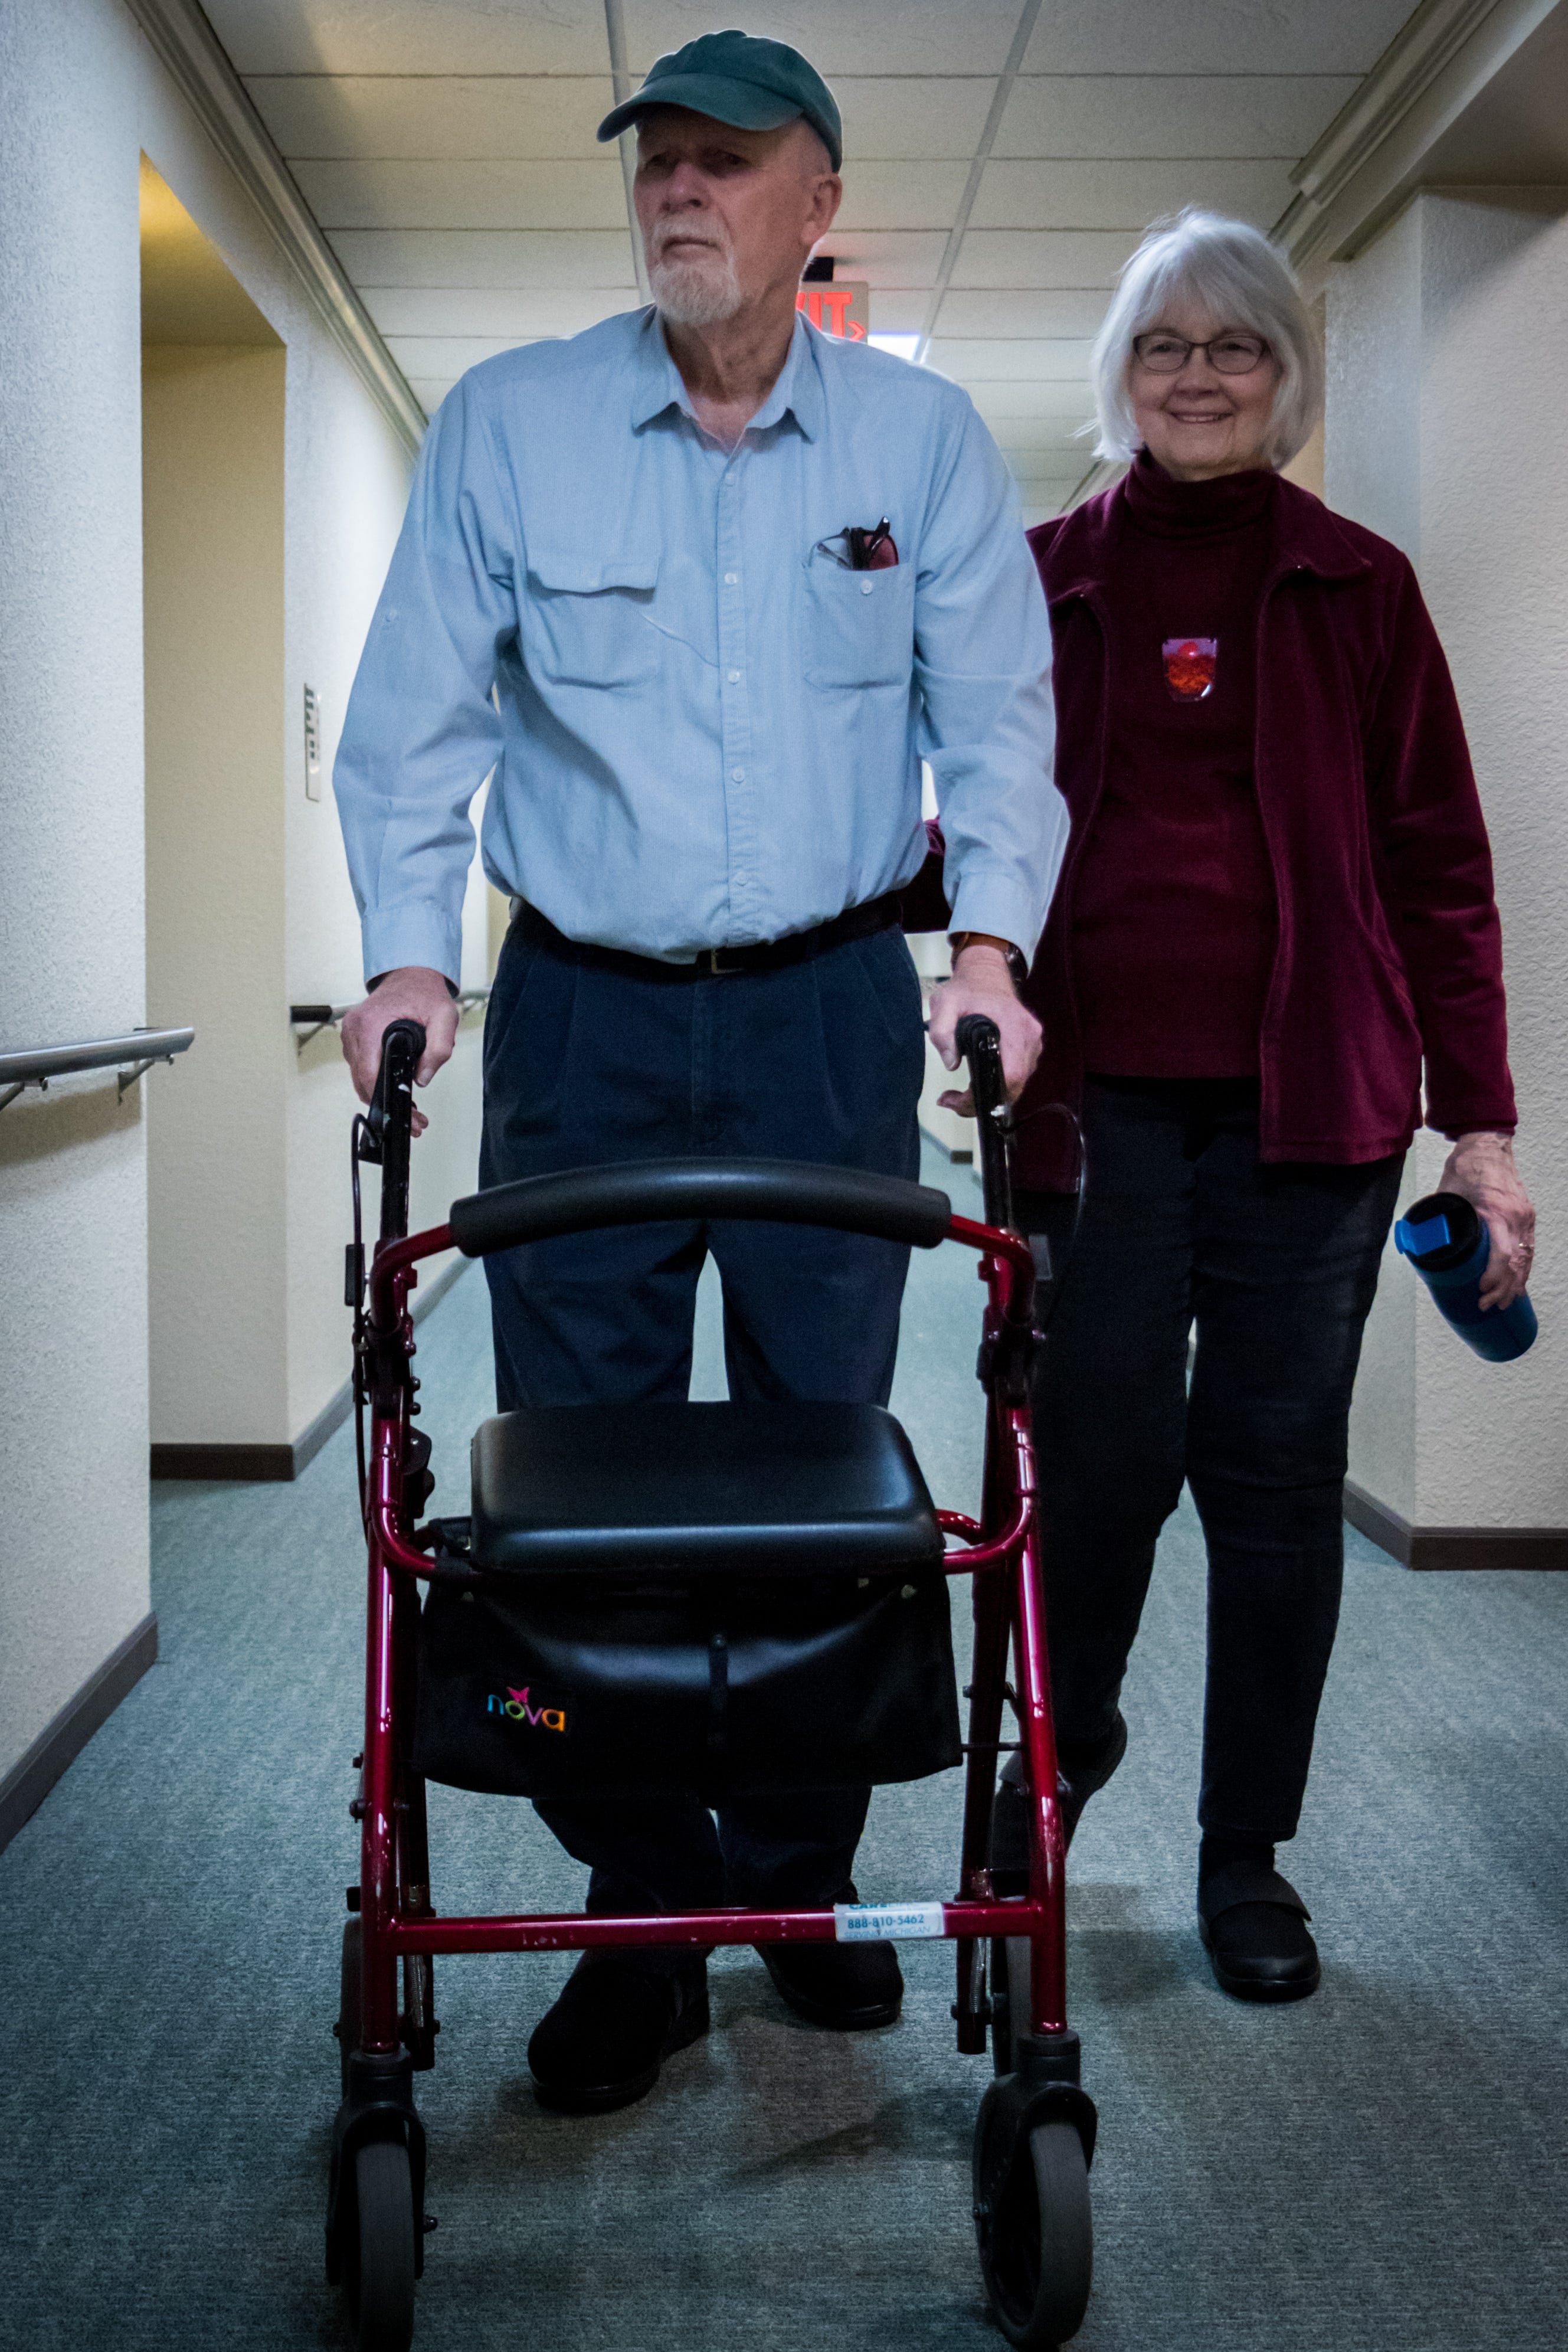 Douglas and Barbara Gilbert walk down the hallway of their home in Grand Haven, Michigan.